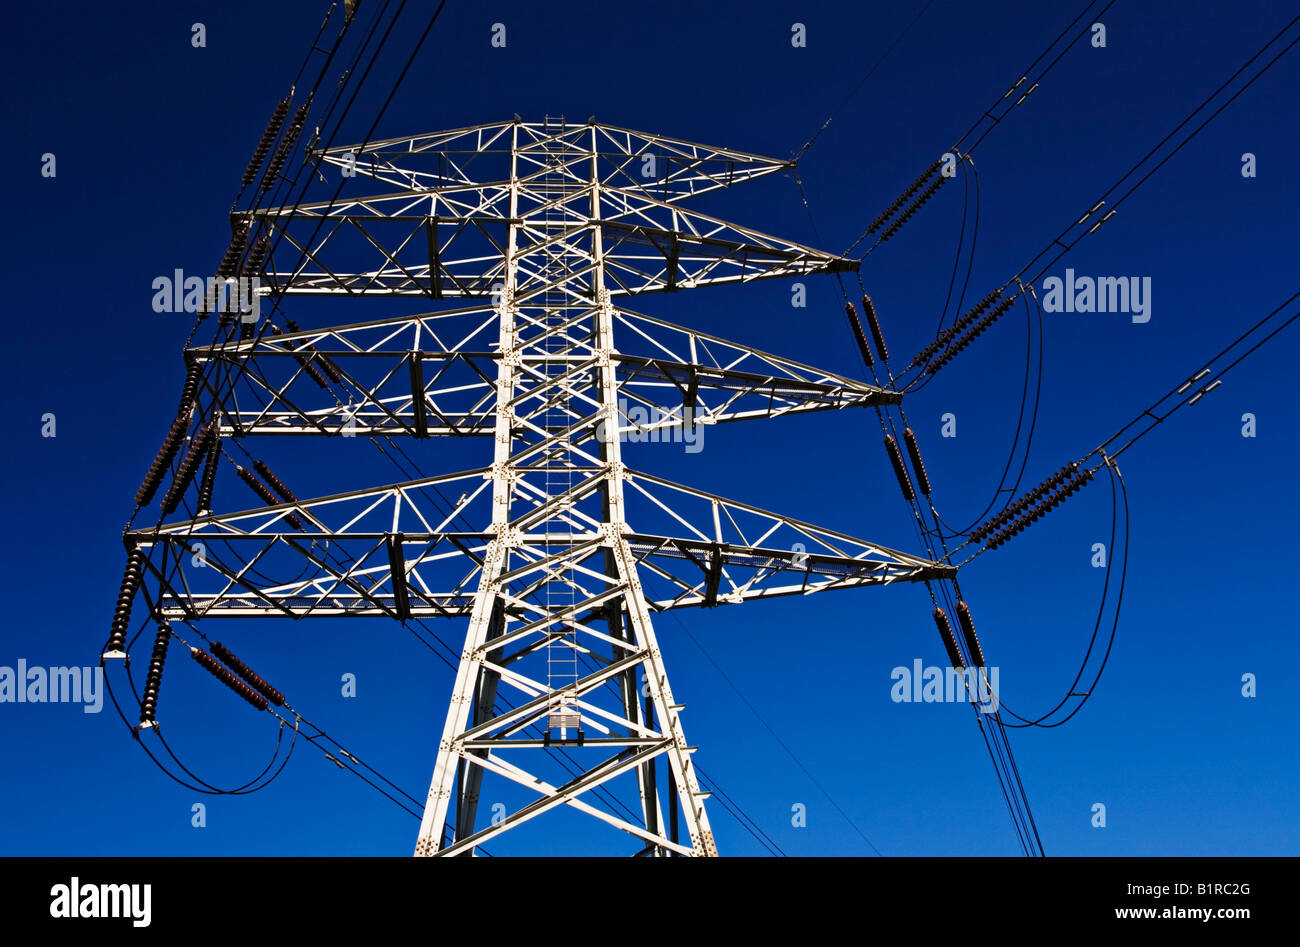 Energy Industry / Electricity. A High Voltage Transmission Tower and Power Lines. Stock Photo